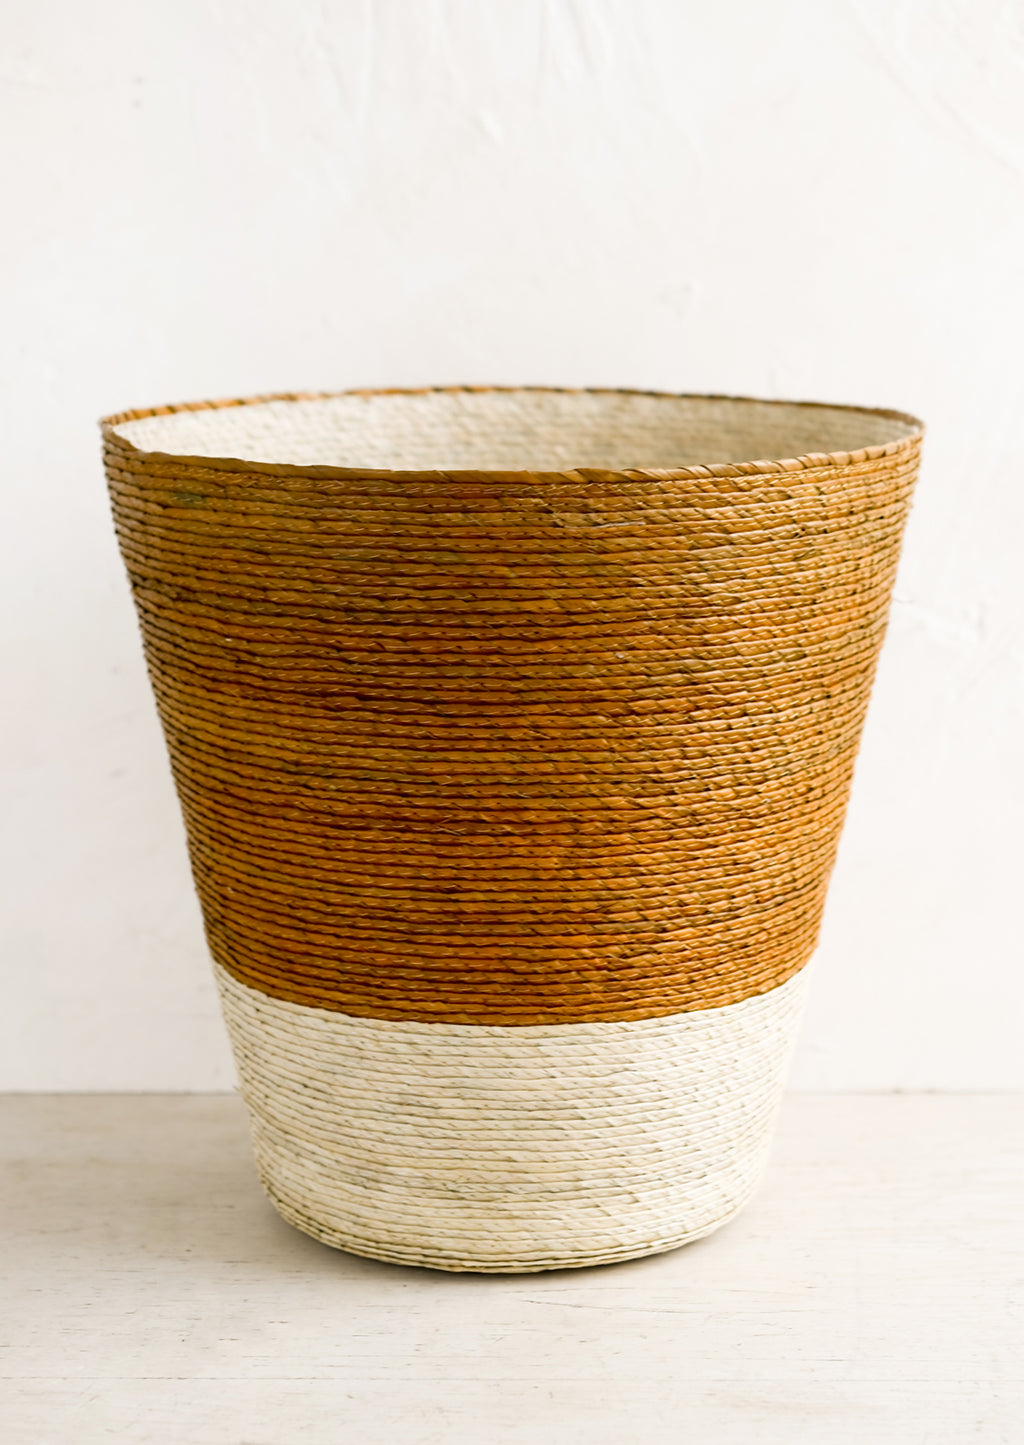 Ochre: A conical shaped storage basket made from woven palm leaf in ochre & natural color way.